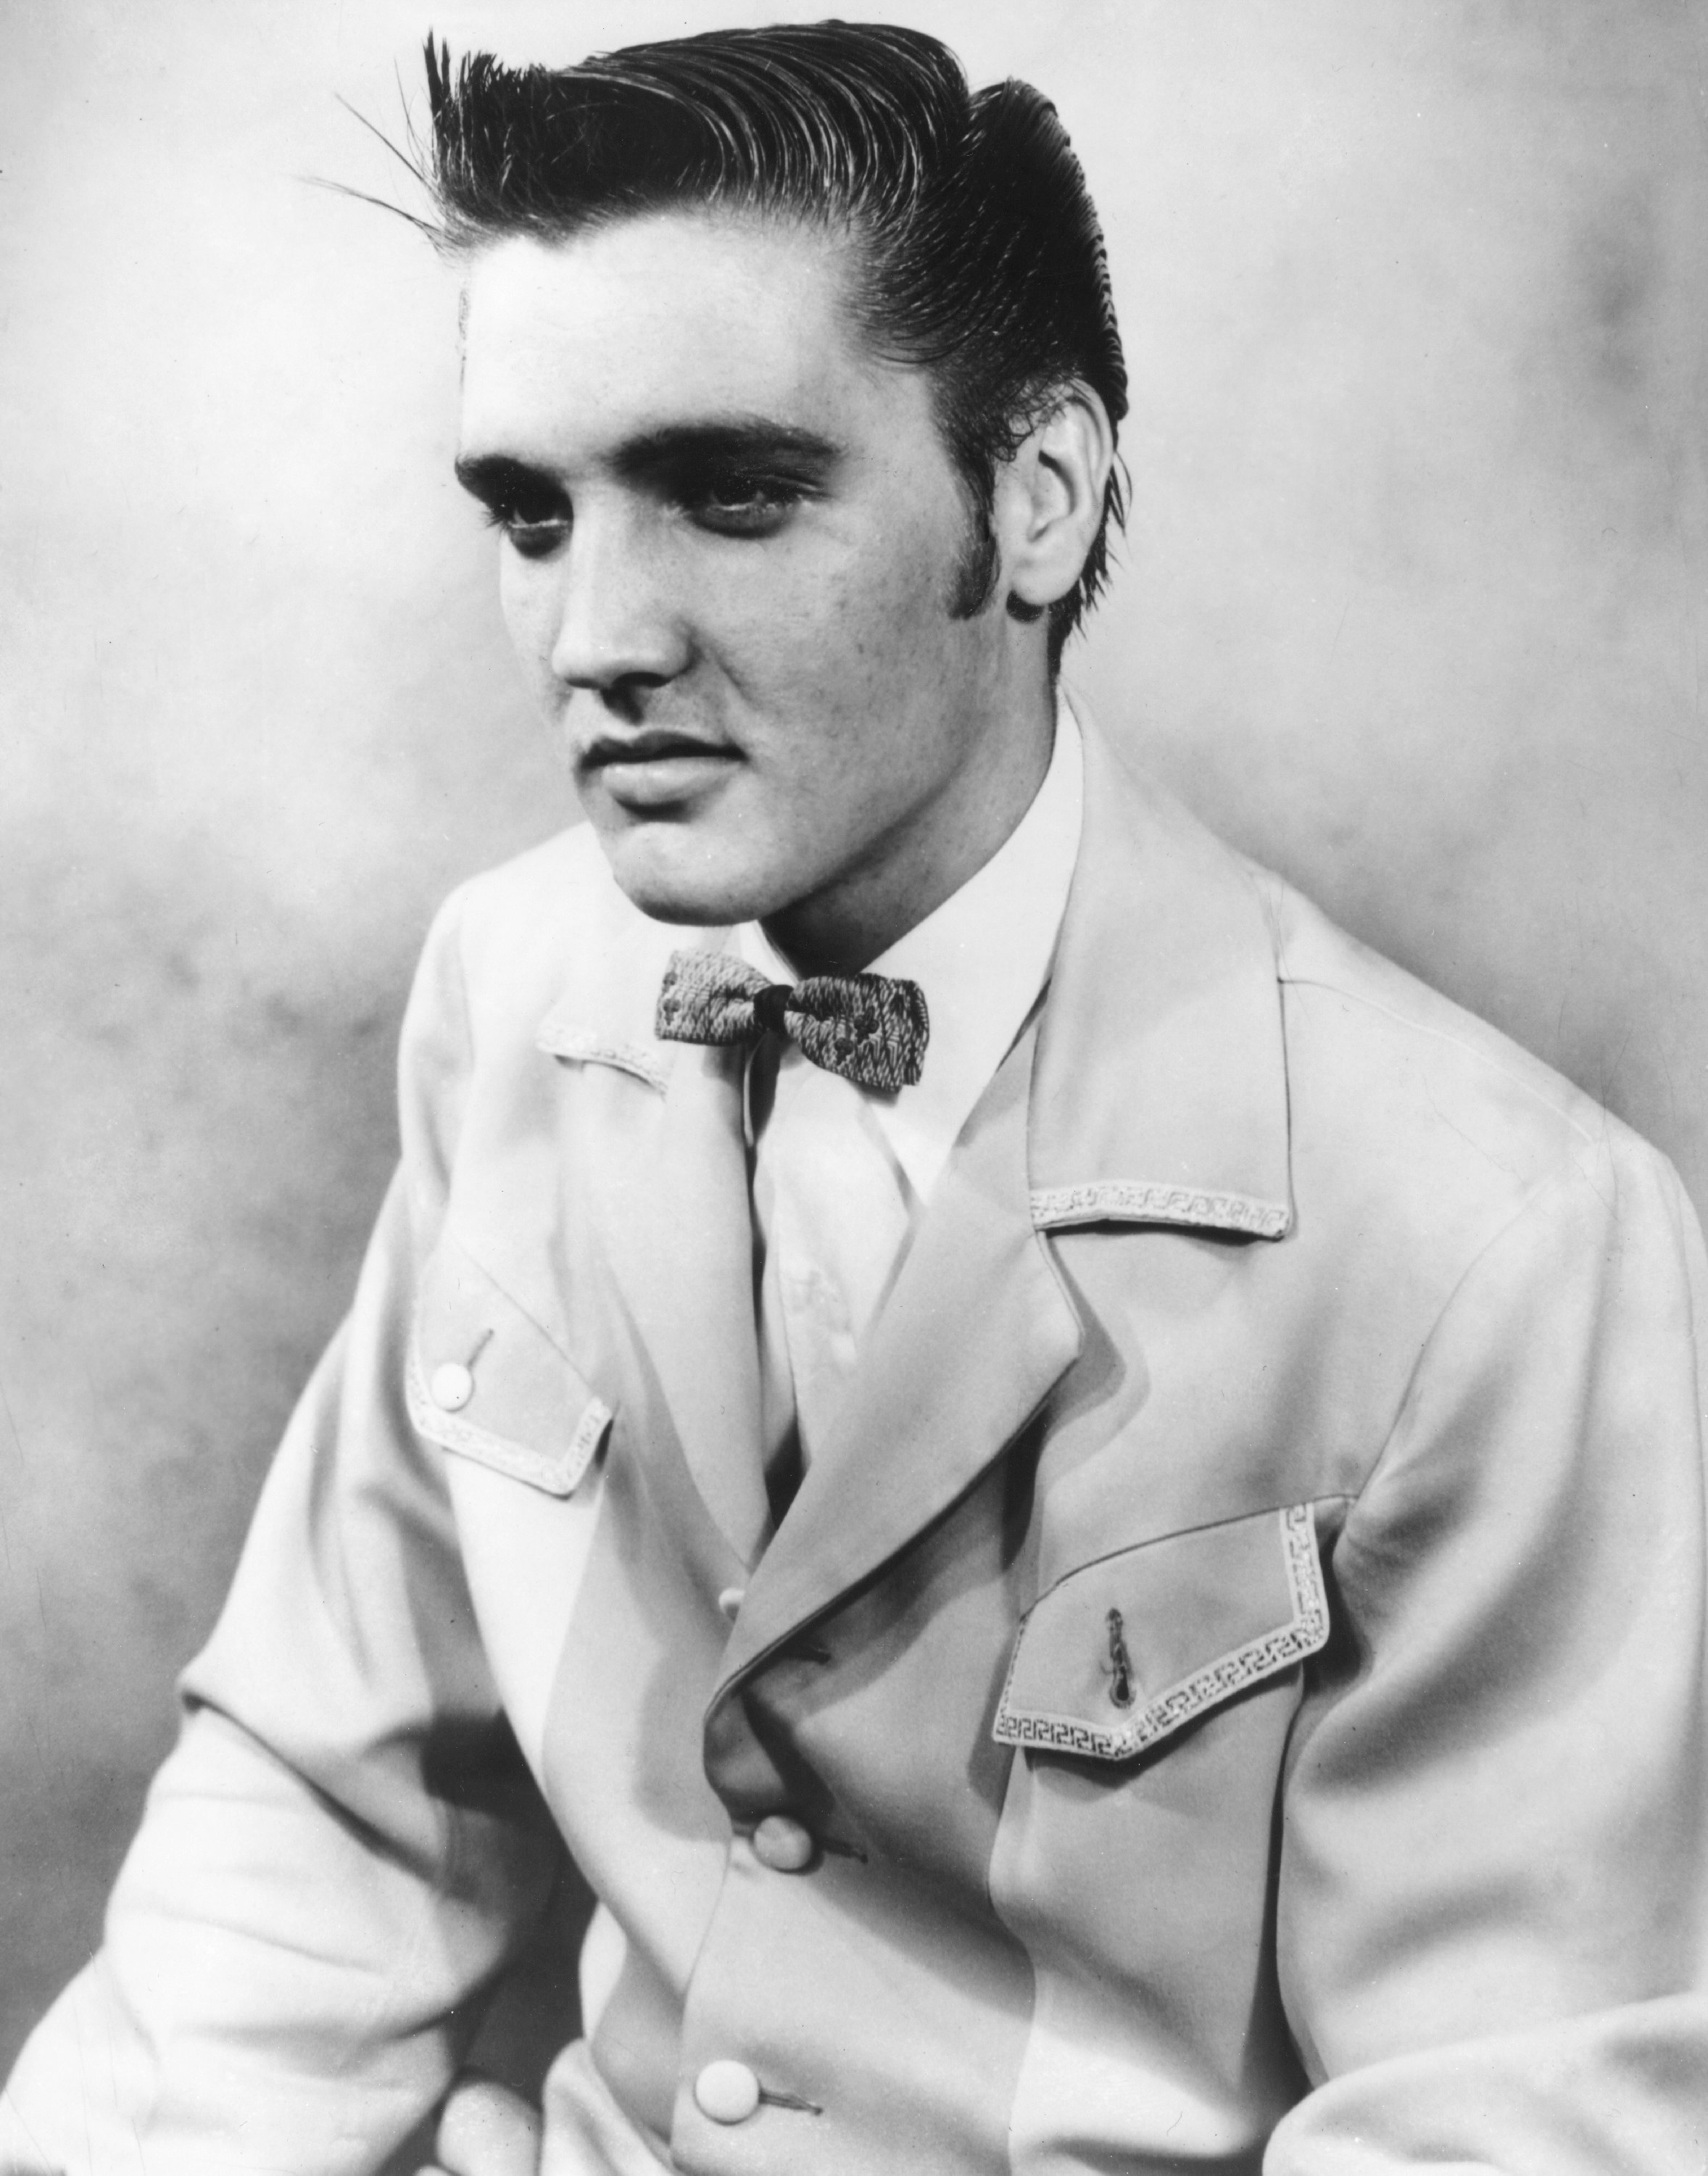 Elvis Presley photographed at The Memphis Press-Scimitar offices, July 27, 1954. This photo ran with Elvis's first profile in the newspaper the following day.